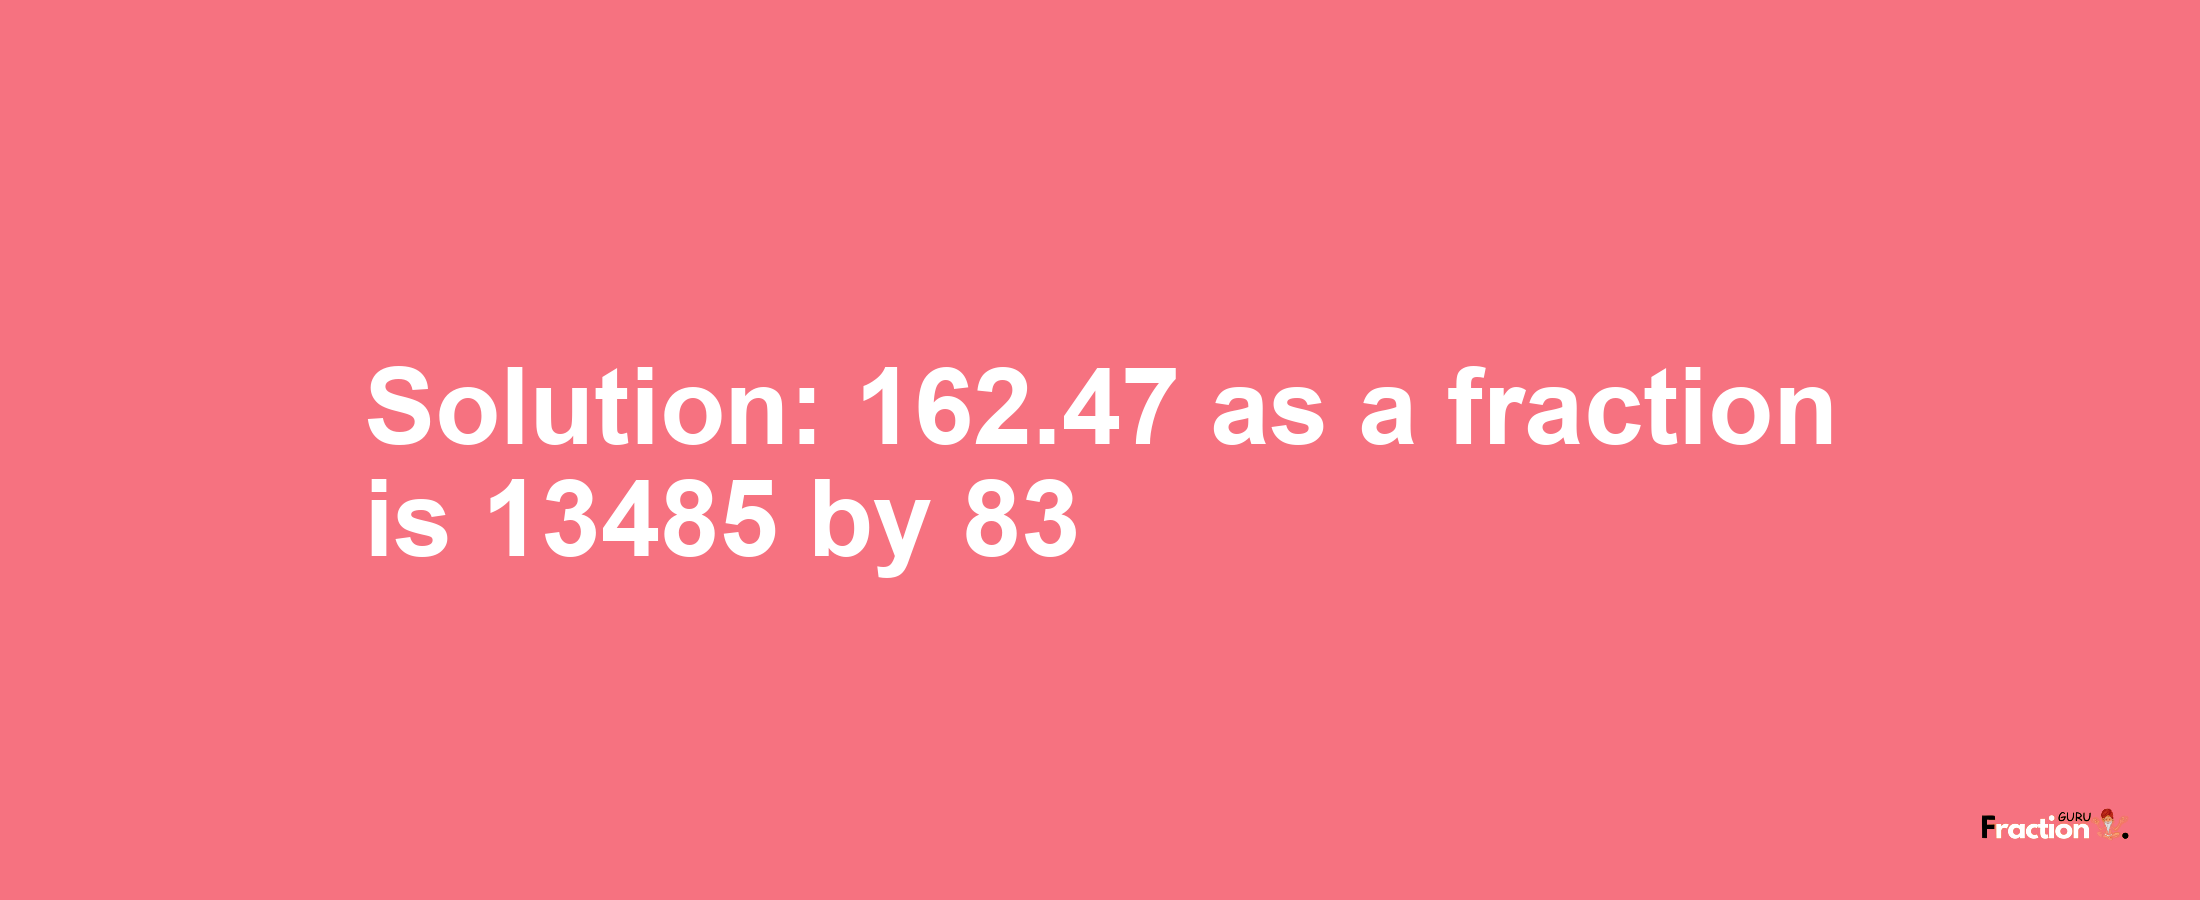 Solution:162.47 as a fraction is 13485/83